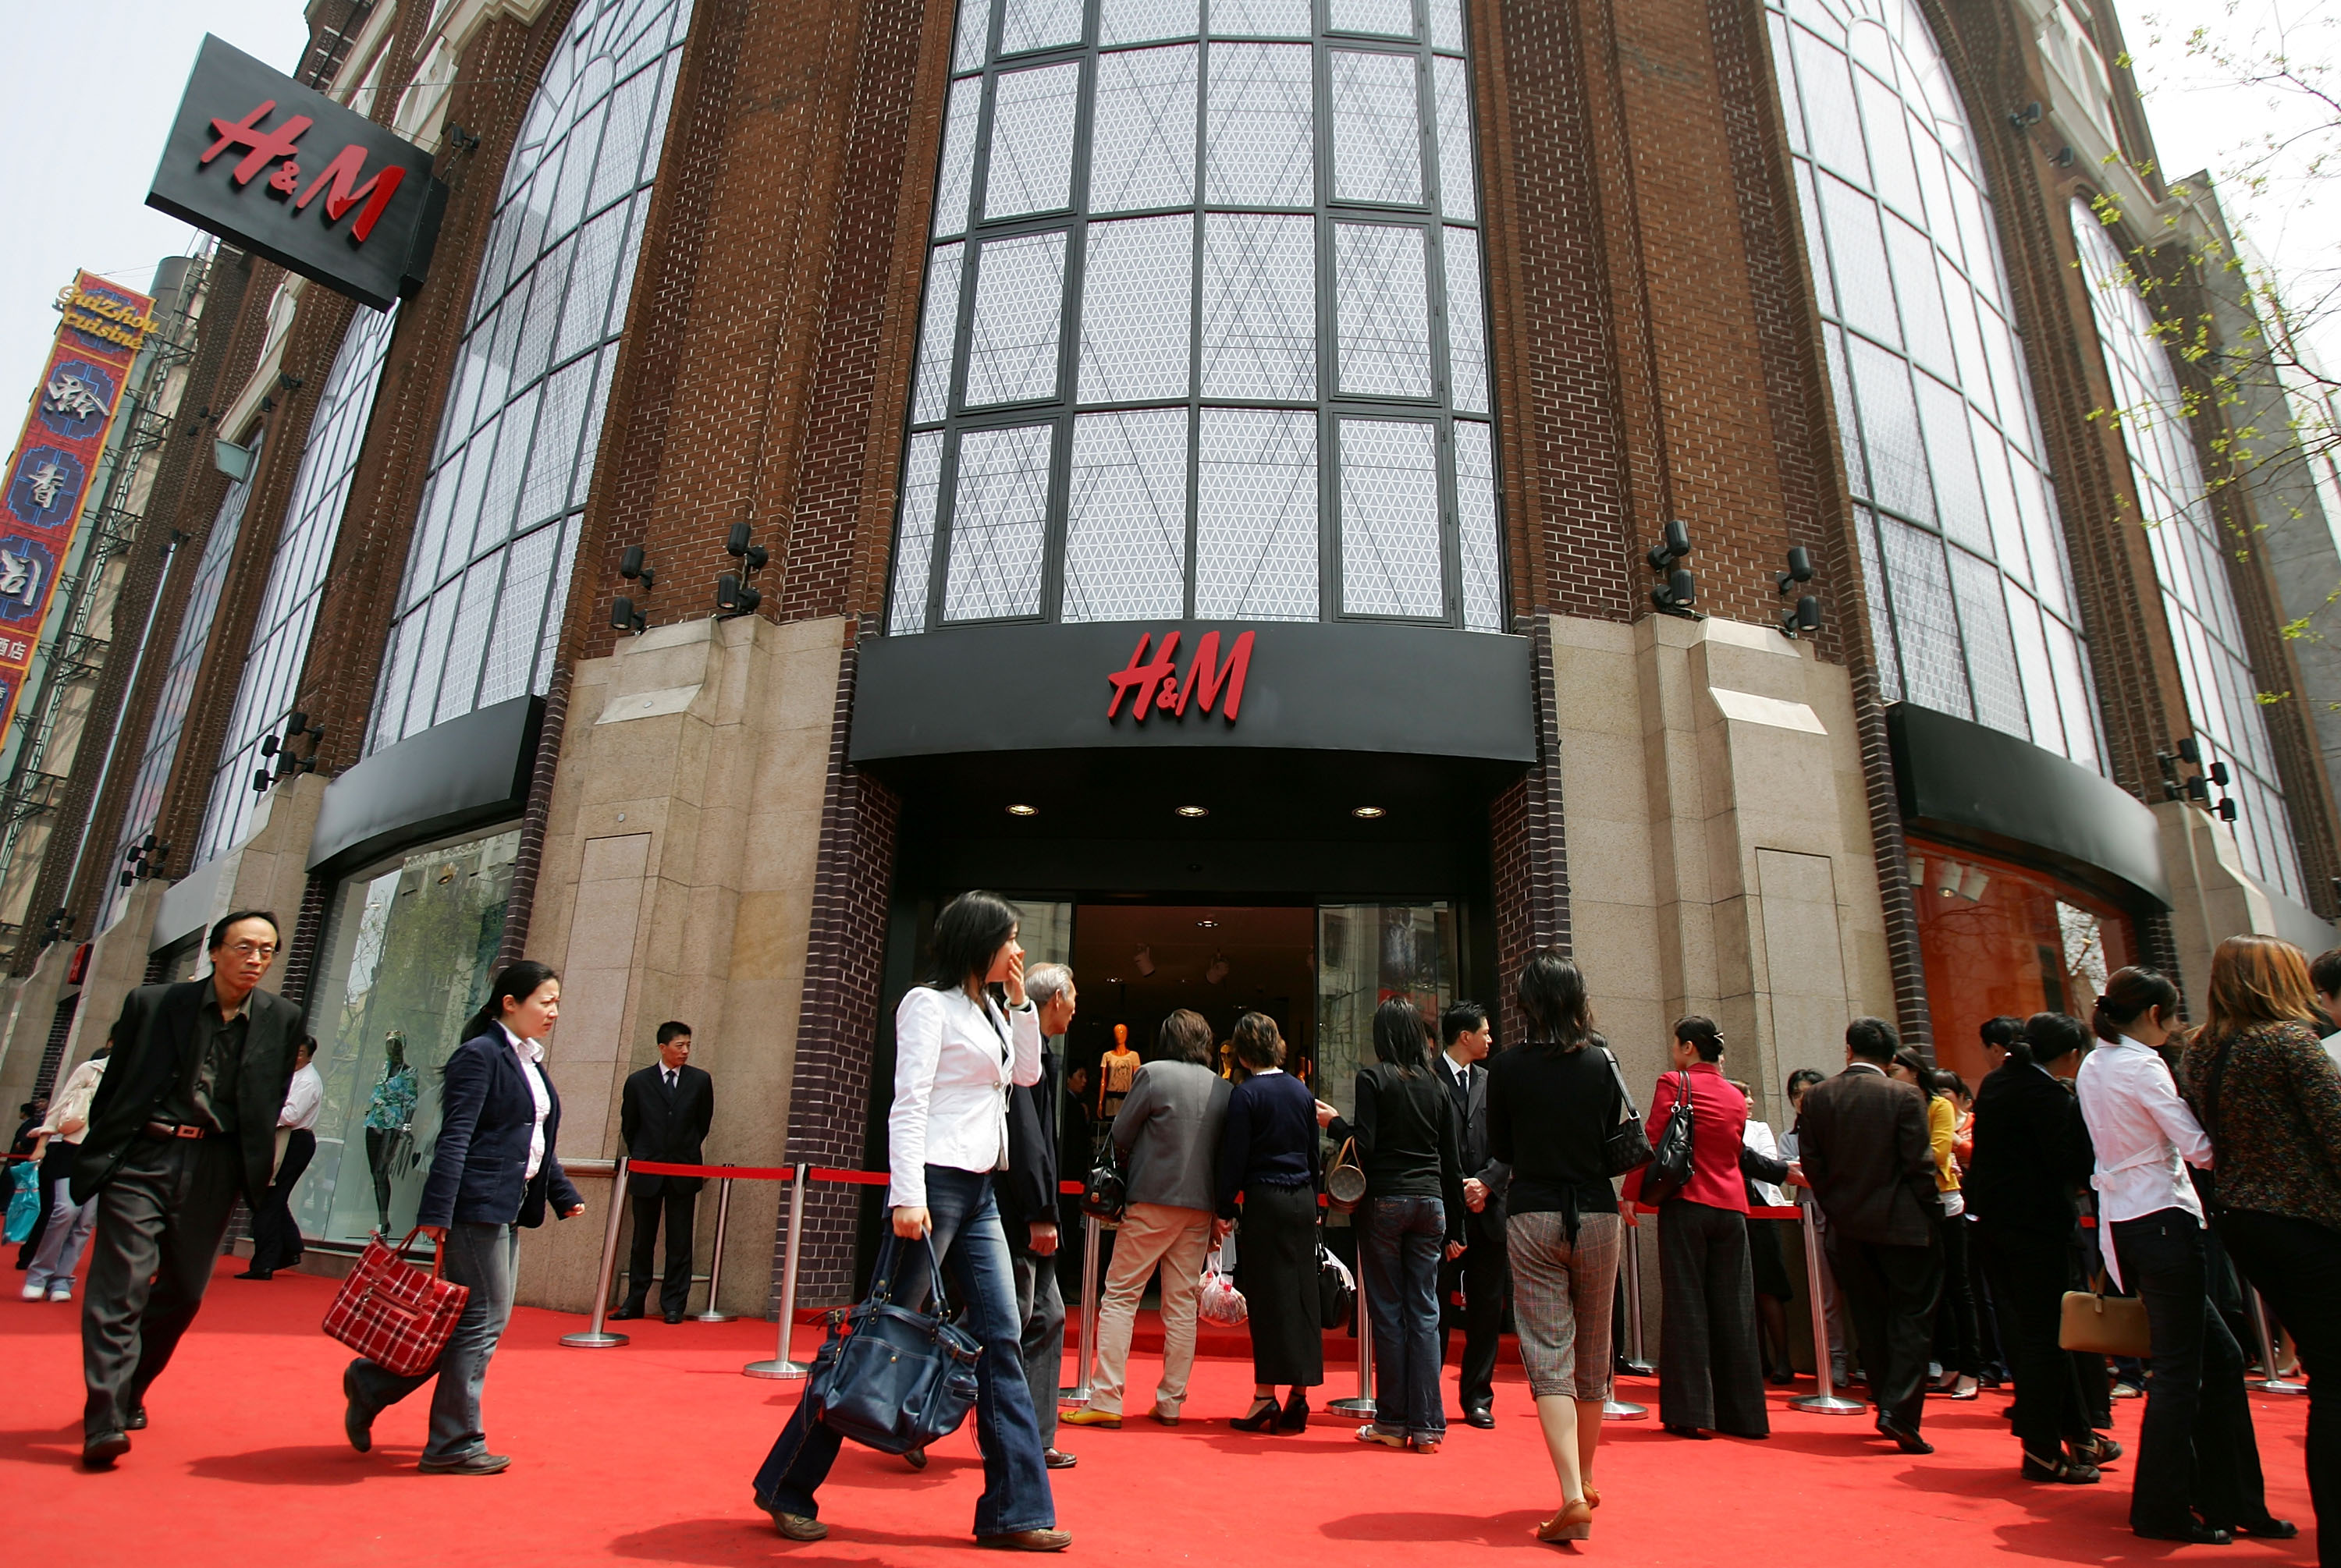 Chinese shoppers wait in line to enter the newly opened H&M store, the first in mainland China, on April 13, 2007 in Shanghai, China. Australian pop singer Kylie Minogue attended the launch. (Photo by Cancan Chu/Getty Images)